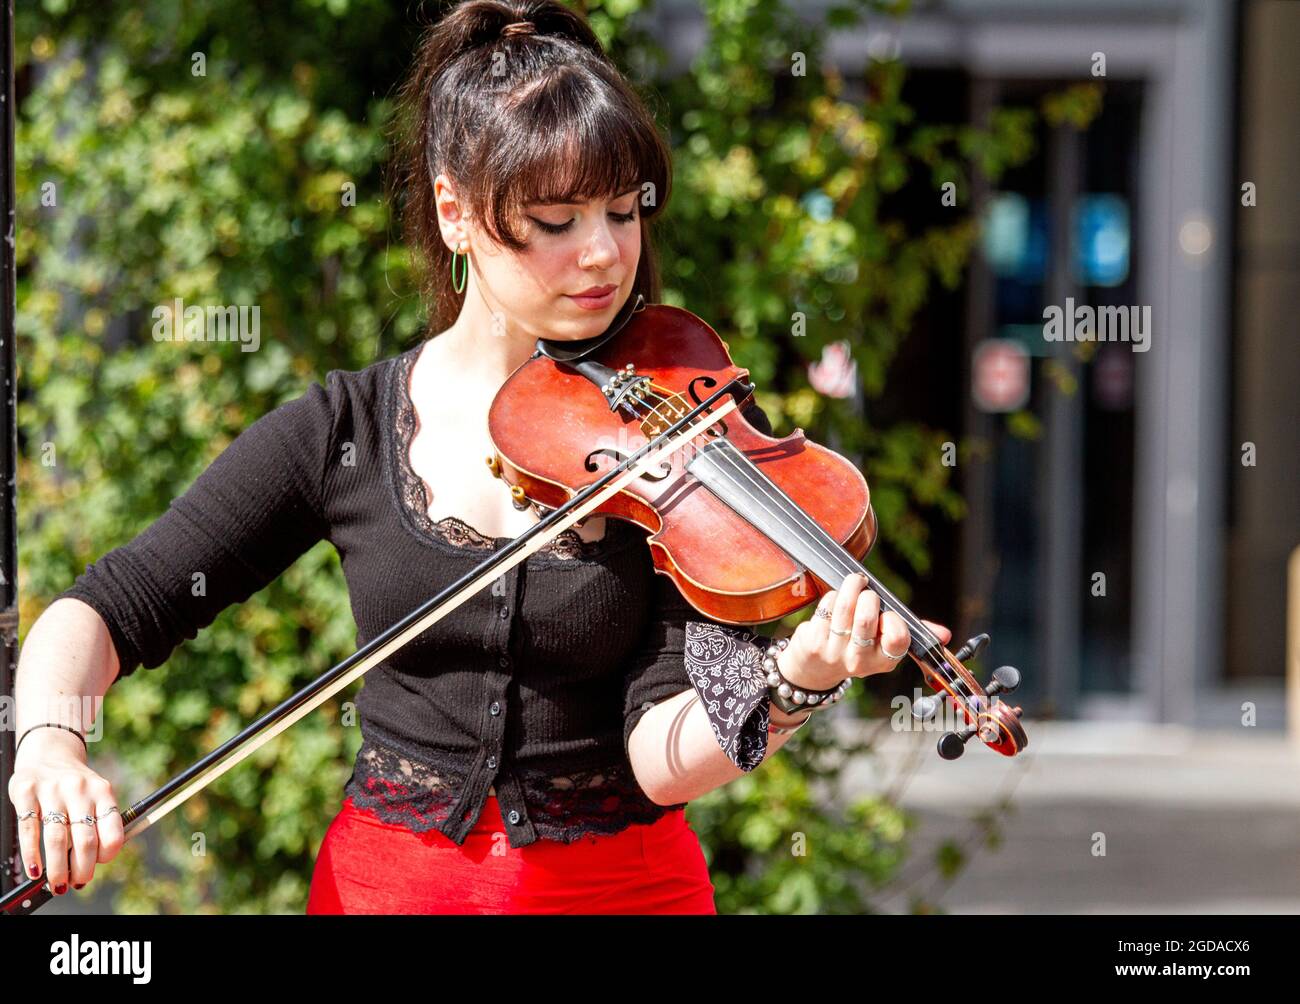 Dundee, Tayside, Scotland, UK. 12th Aug, 2021. UK Weather: A warm windy day with plenty sunshine across North East Scotland with temperatures reaching 18°C. A young fashionable female violinist playing classical music whilst busking outside The Overgate shopping centre in Dundee. Credit: Dundee Photographics/Alamy Live News Stock Photo